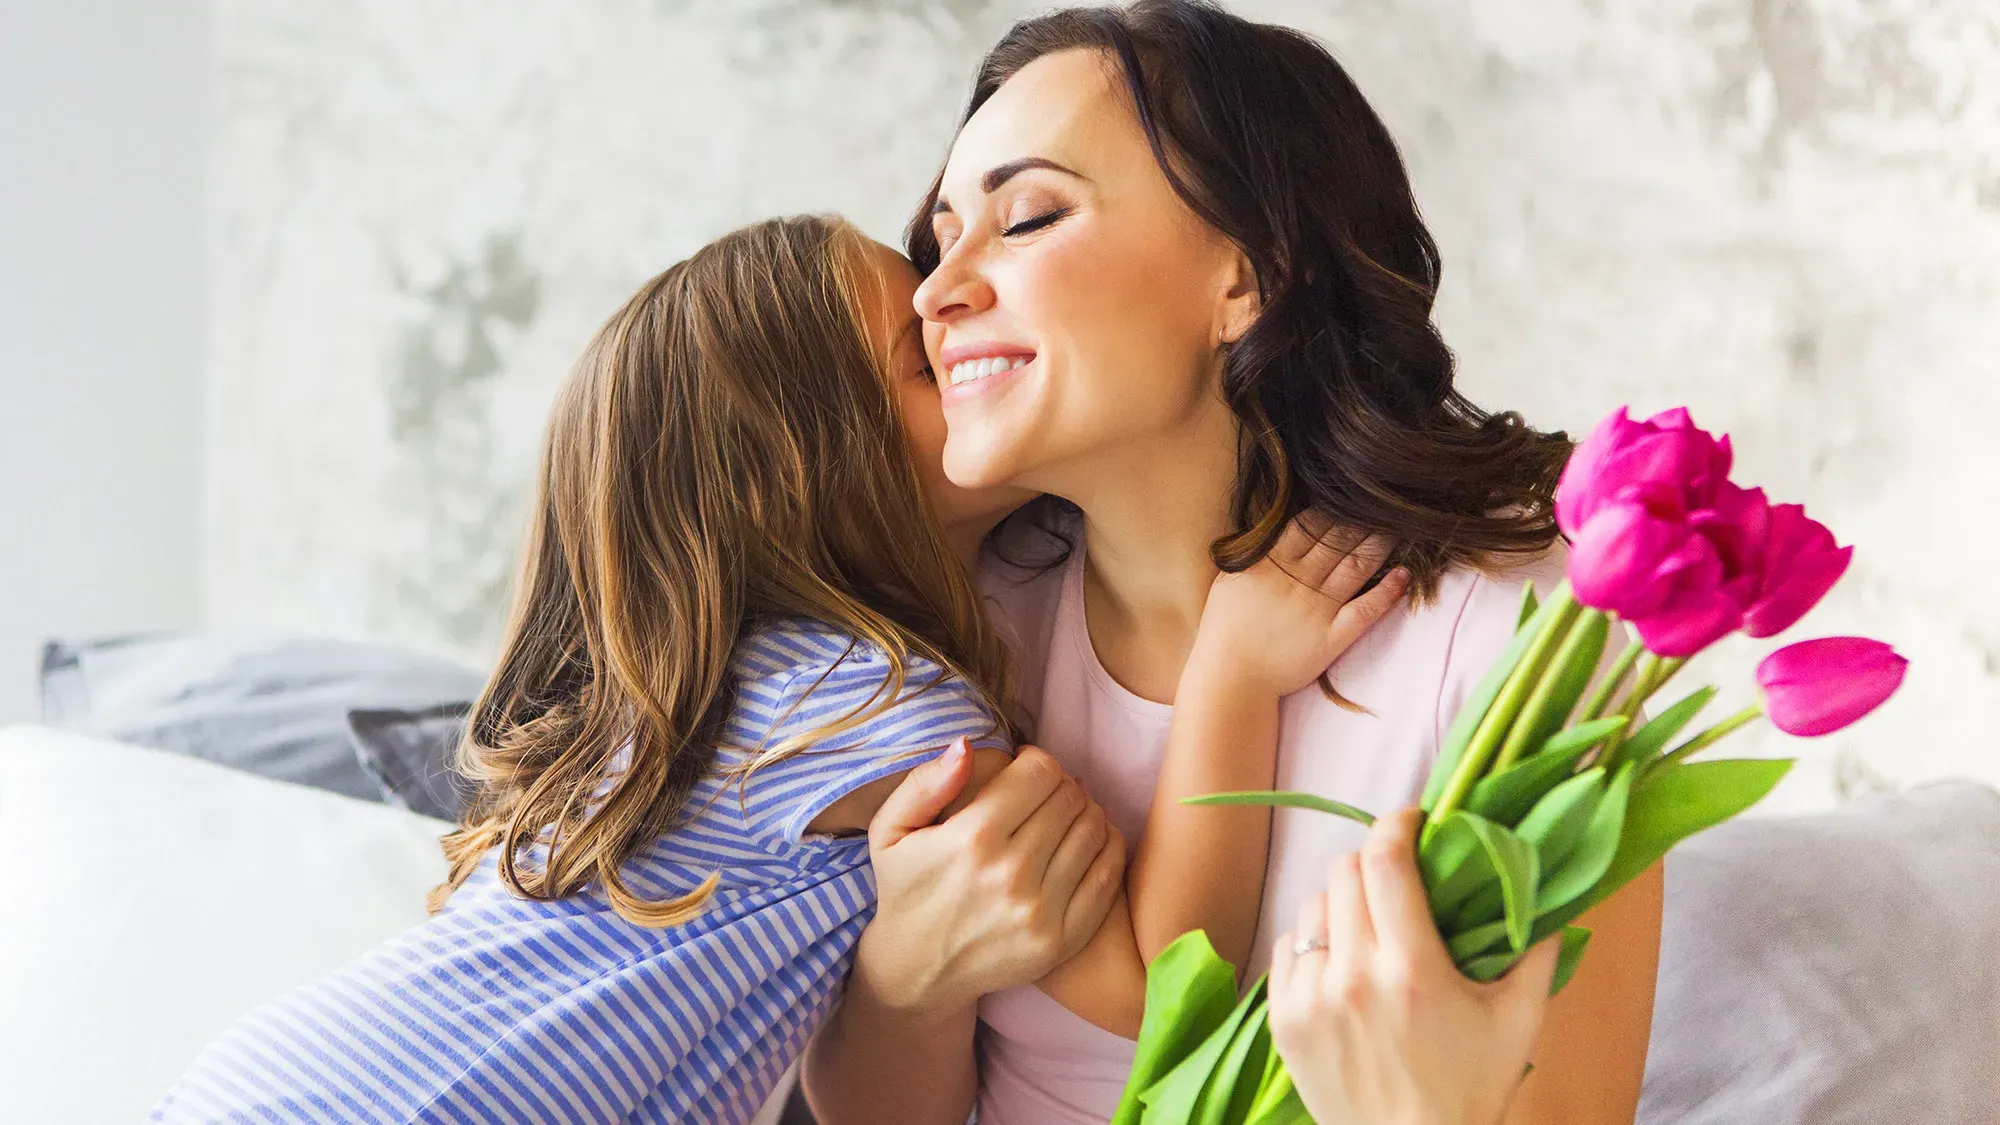 Emotional Marketing: The Mother's Day Weapon